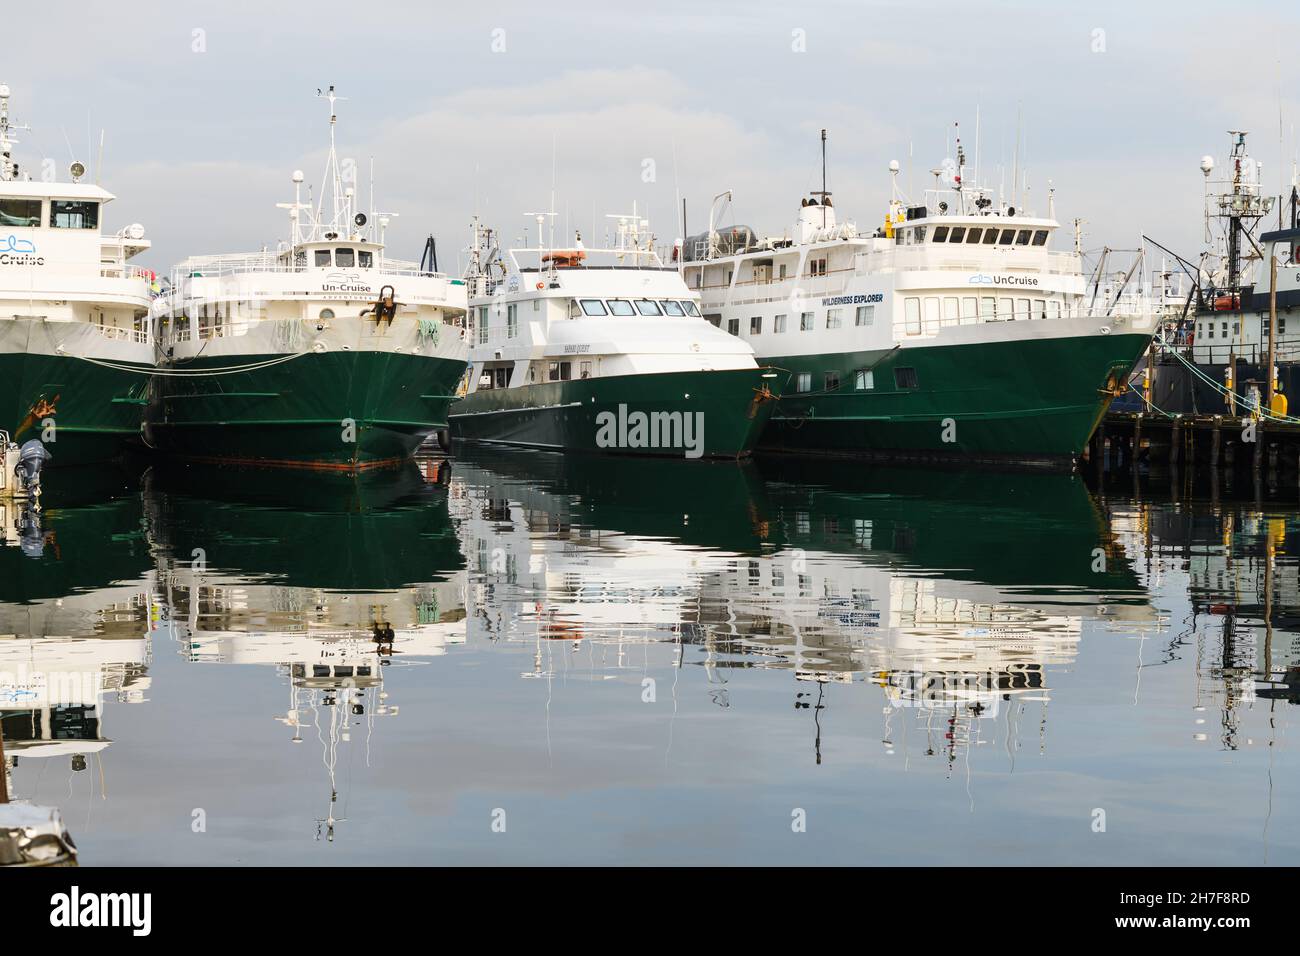 Seattle - November 21, 2021; Boats of the UnCruise Adventures company ties up for winter at Fishermens Terminal in Seattle.  The green and white ships Stock Photo